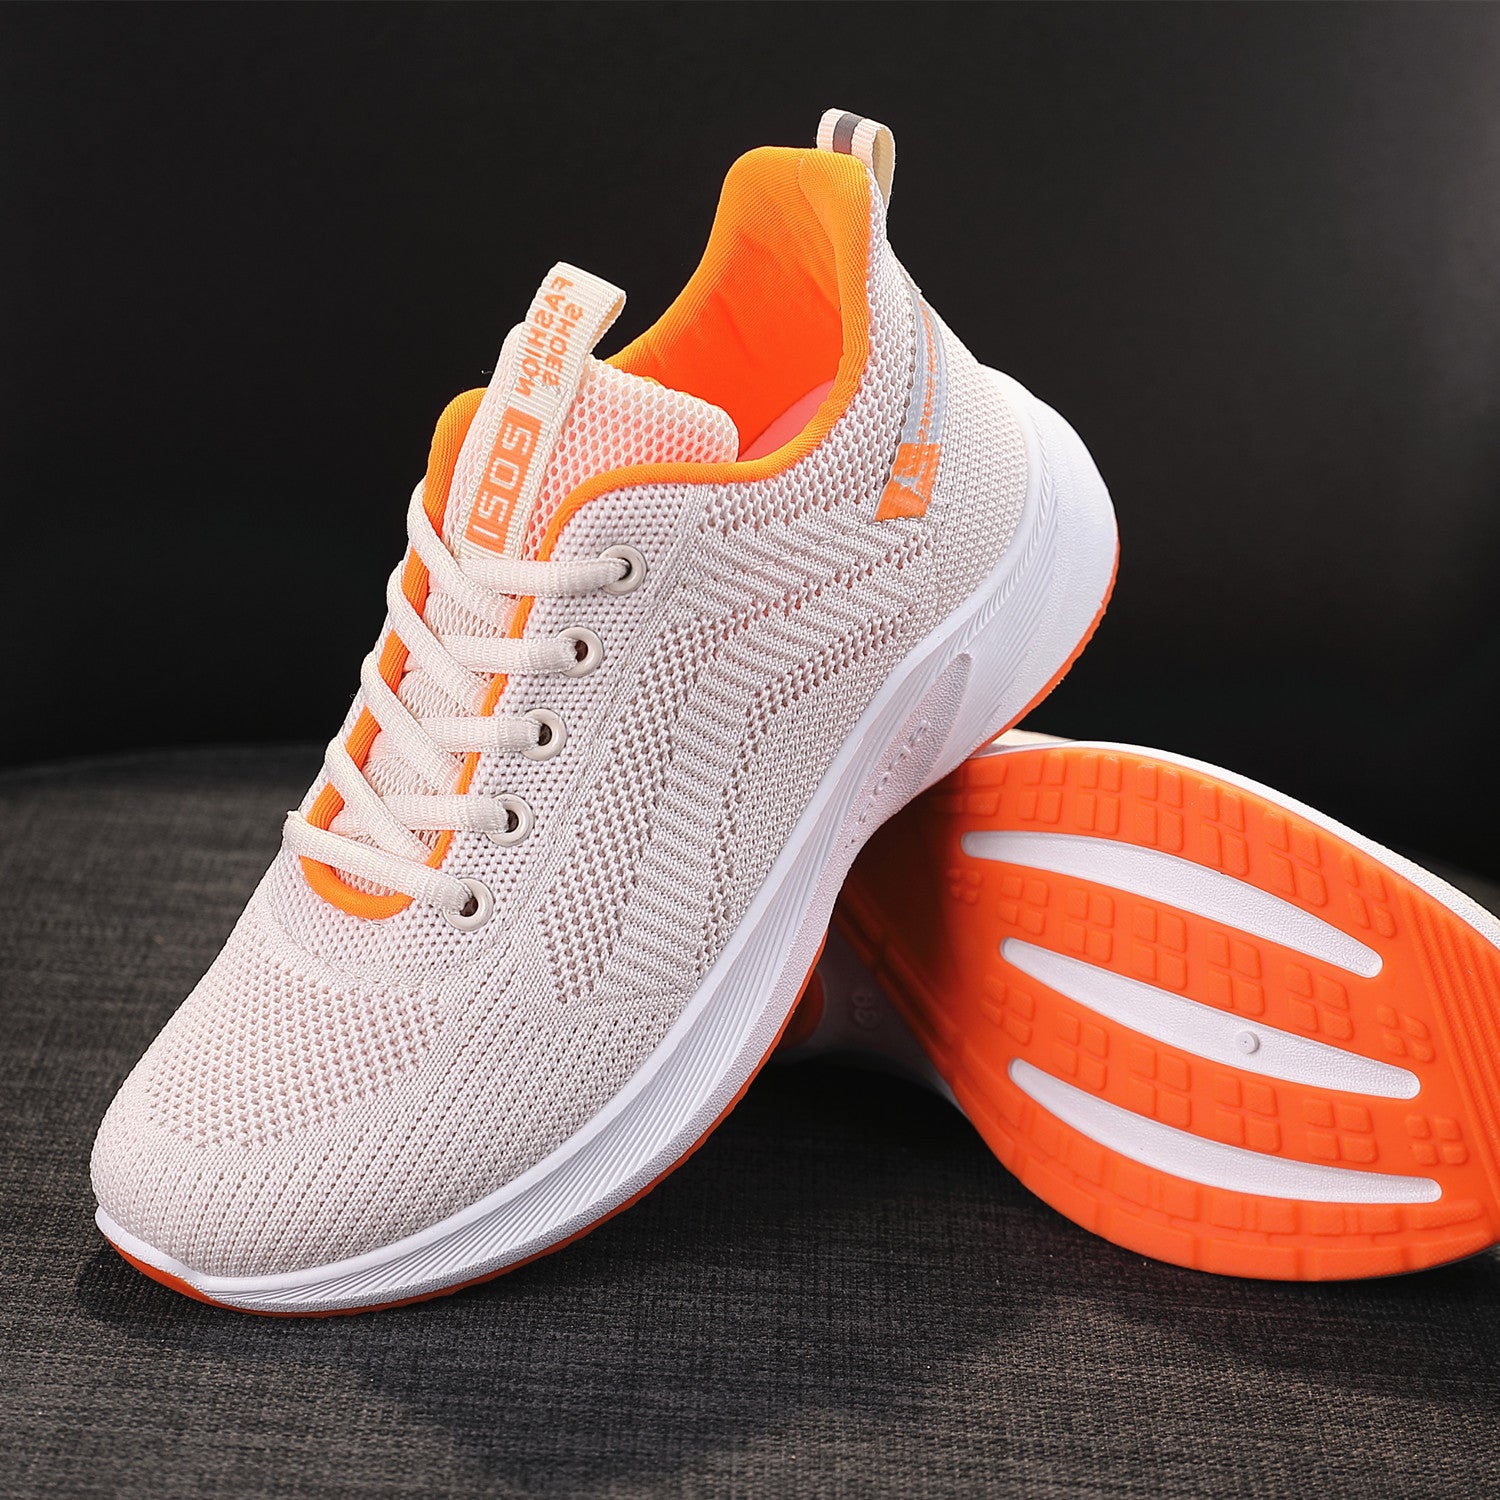 Woven Spring Breathable Tide Fashion Sports And Casual Shoes